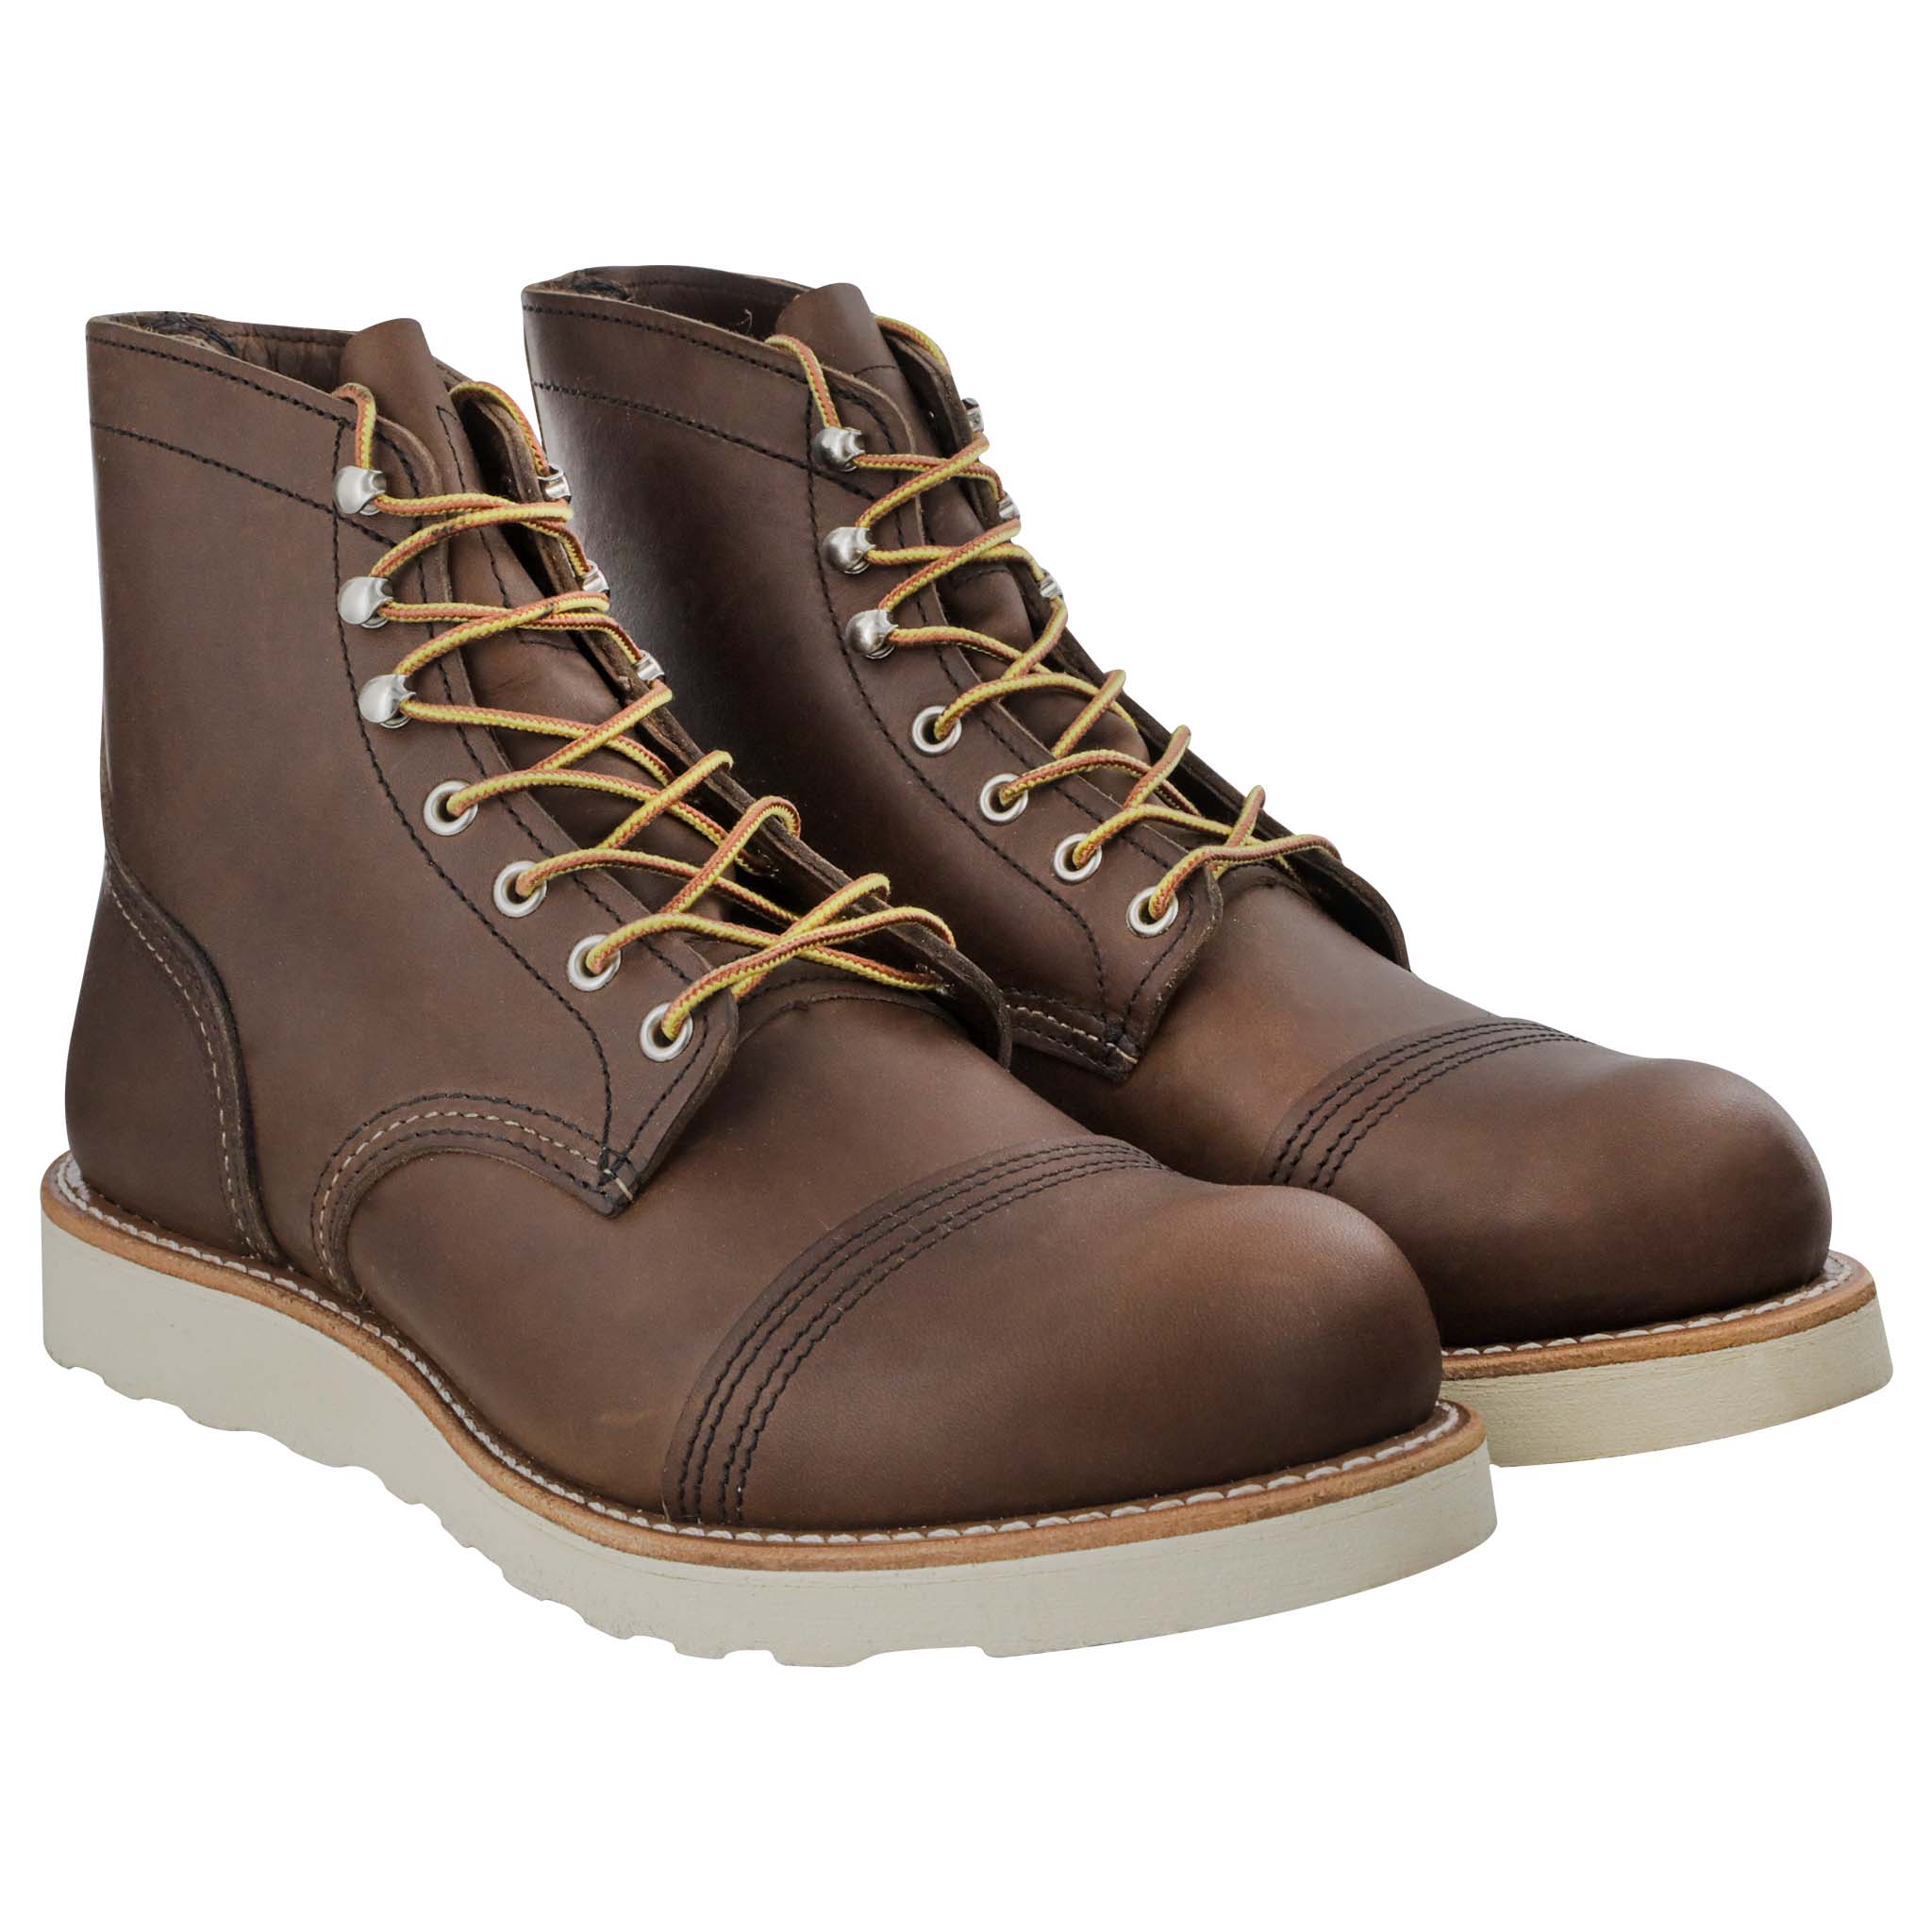 Red Wing Shoes | Purpose Built Footwear | Work Boots - Gunthers 